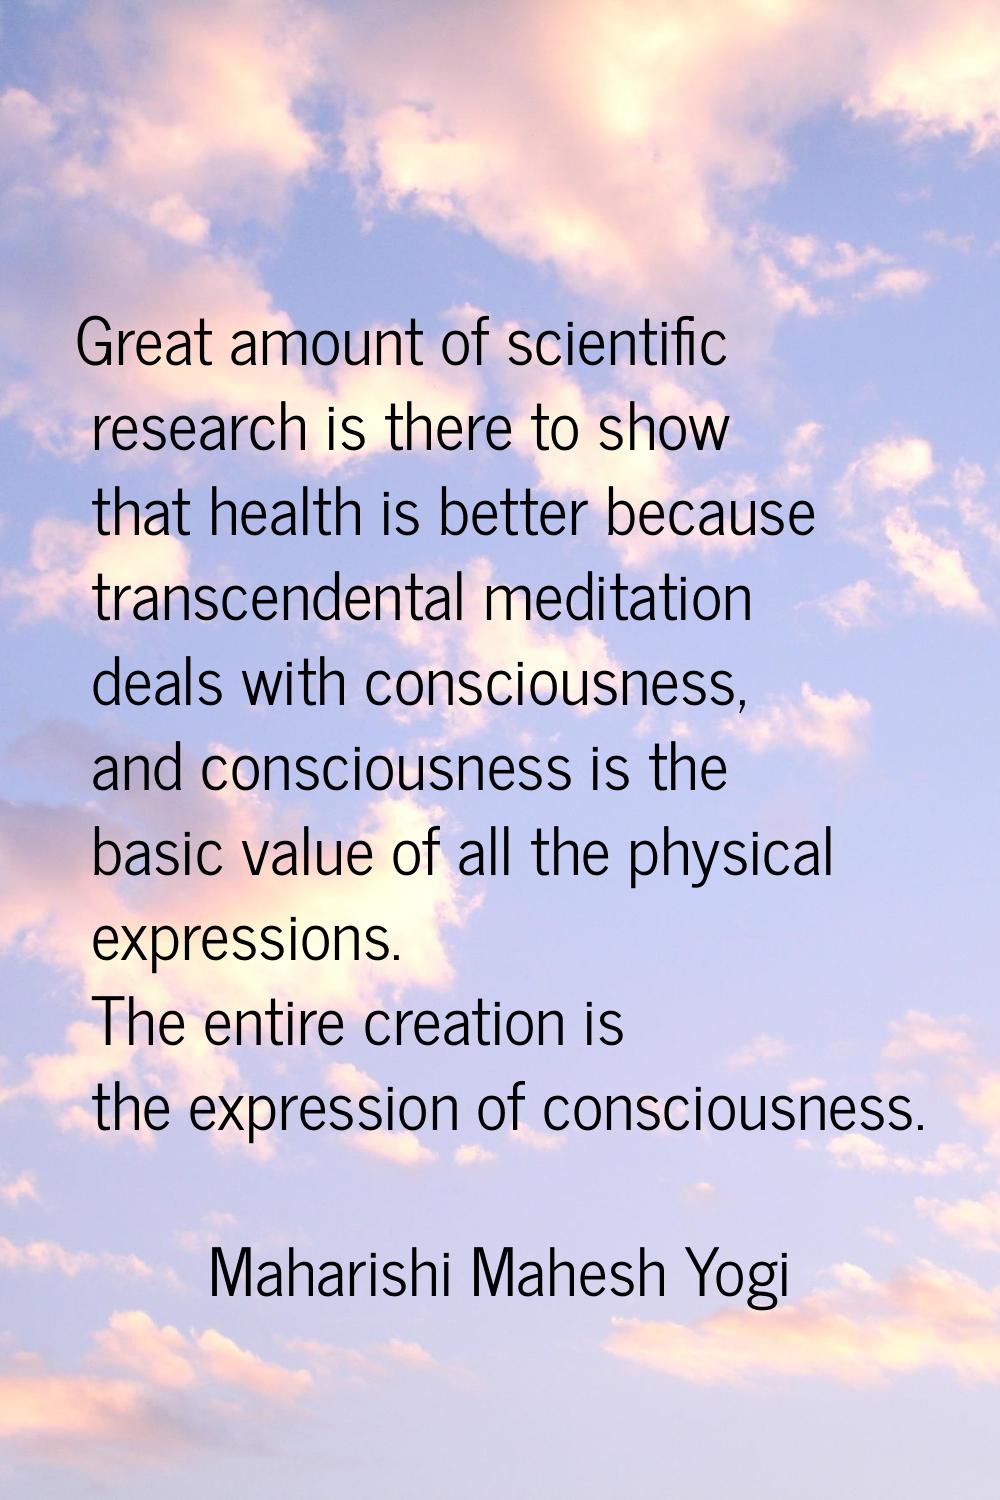 Great amount of scientific research is there to show that health is better because transcendental m